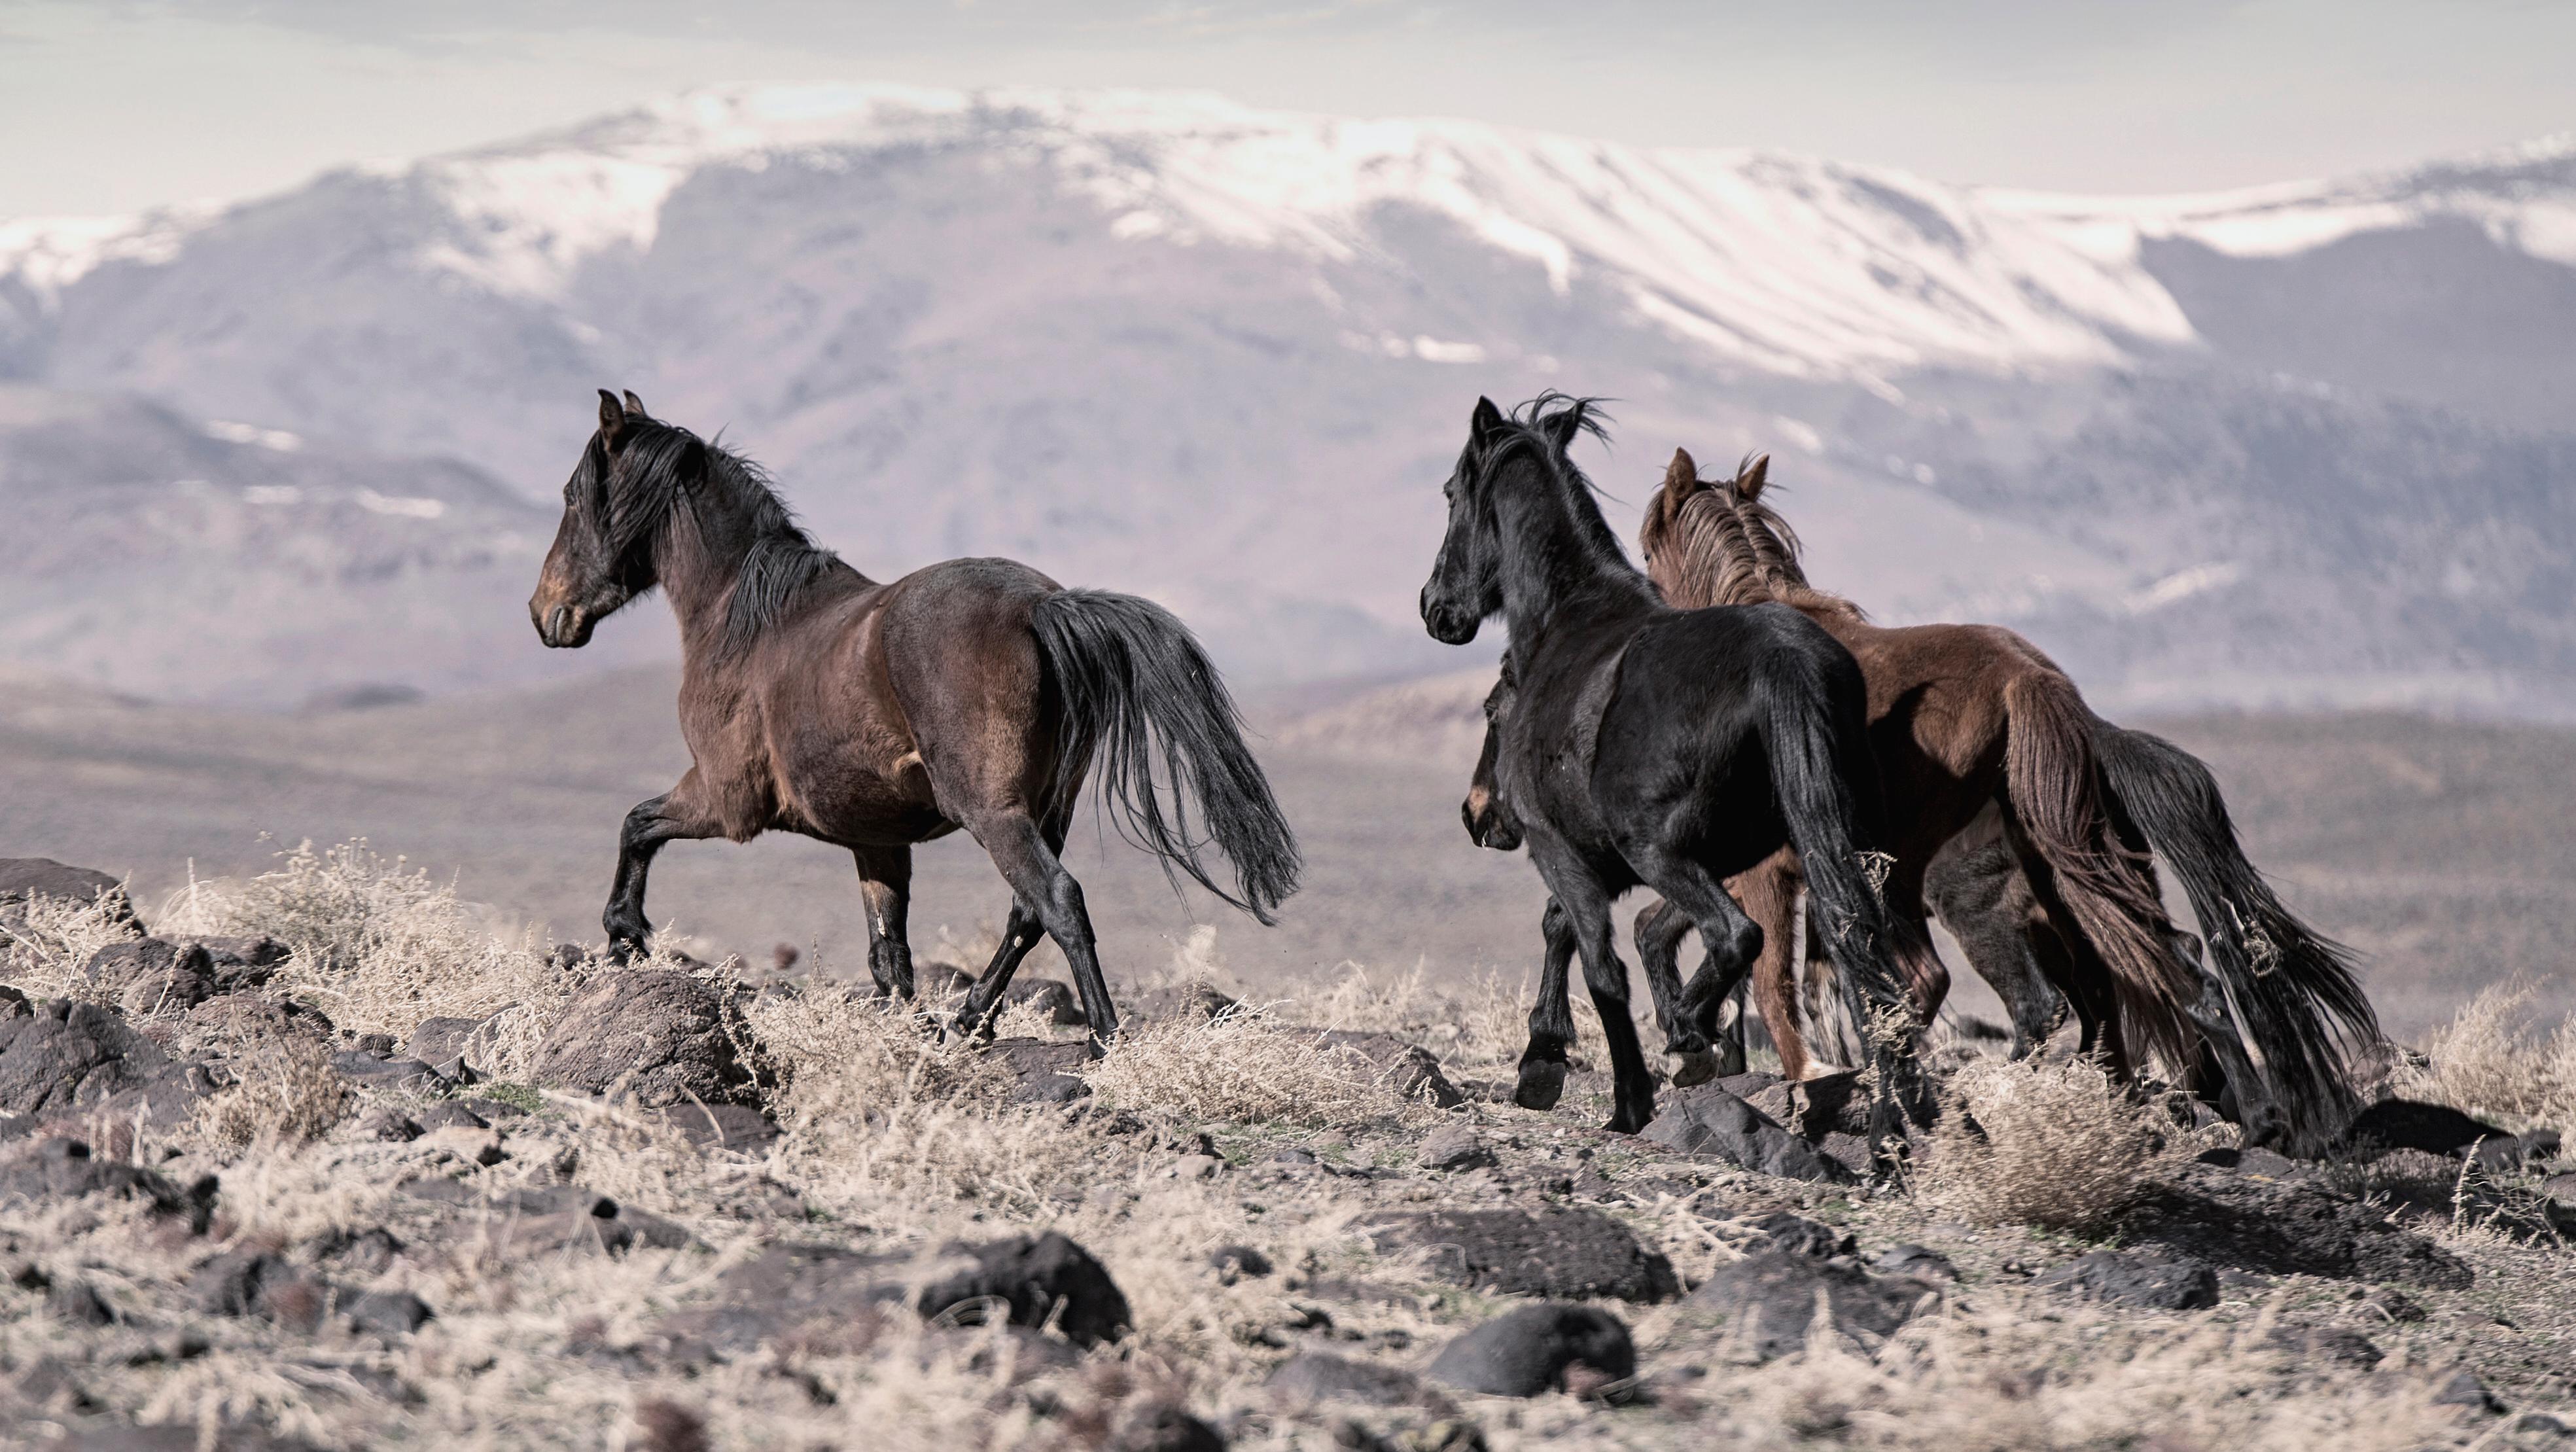 Shane Russeck Black and White Photograph - "On the Go" 40x55 Wild Horses, Mustangs Fine Art Print Photography Photograph